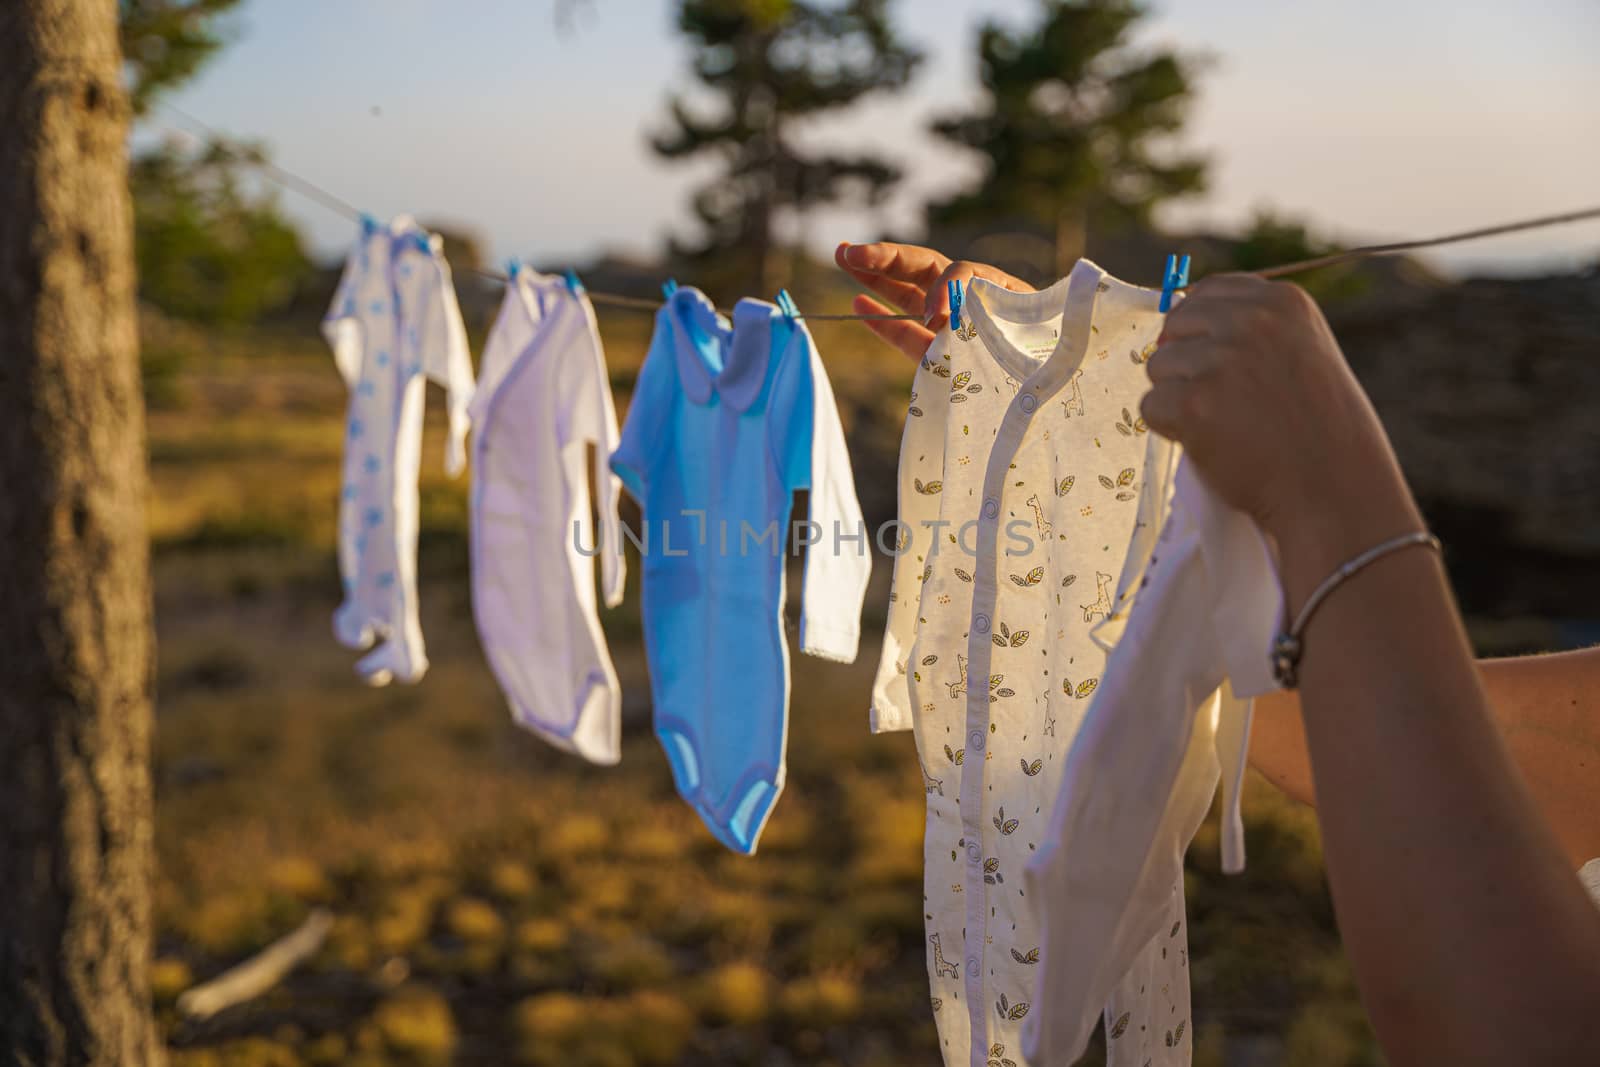 Baby goods hanging on the clothesline.